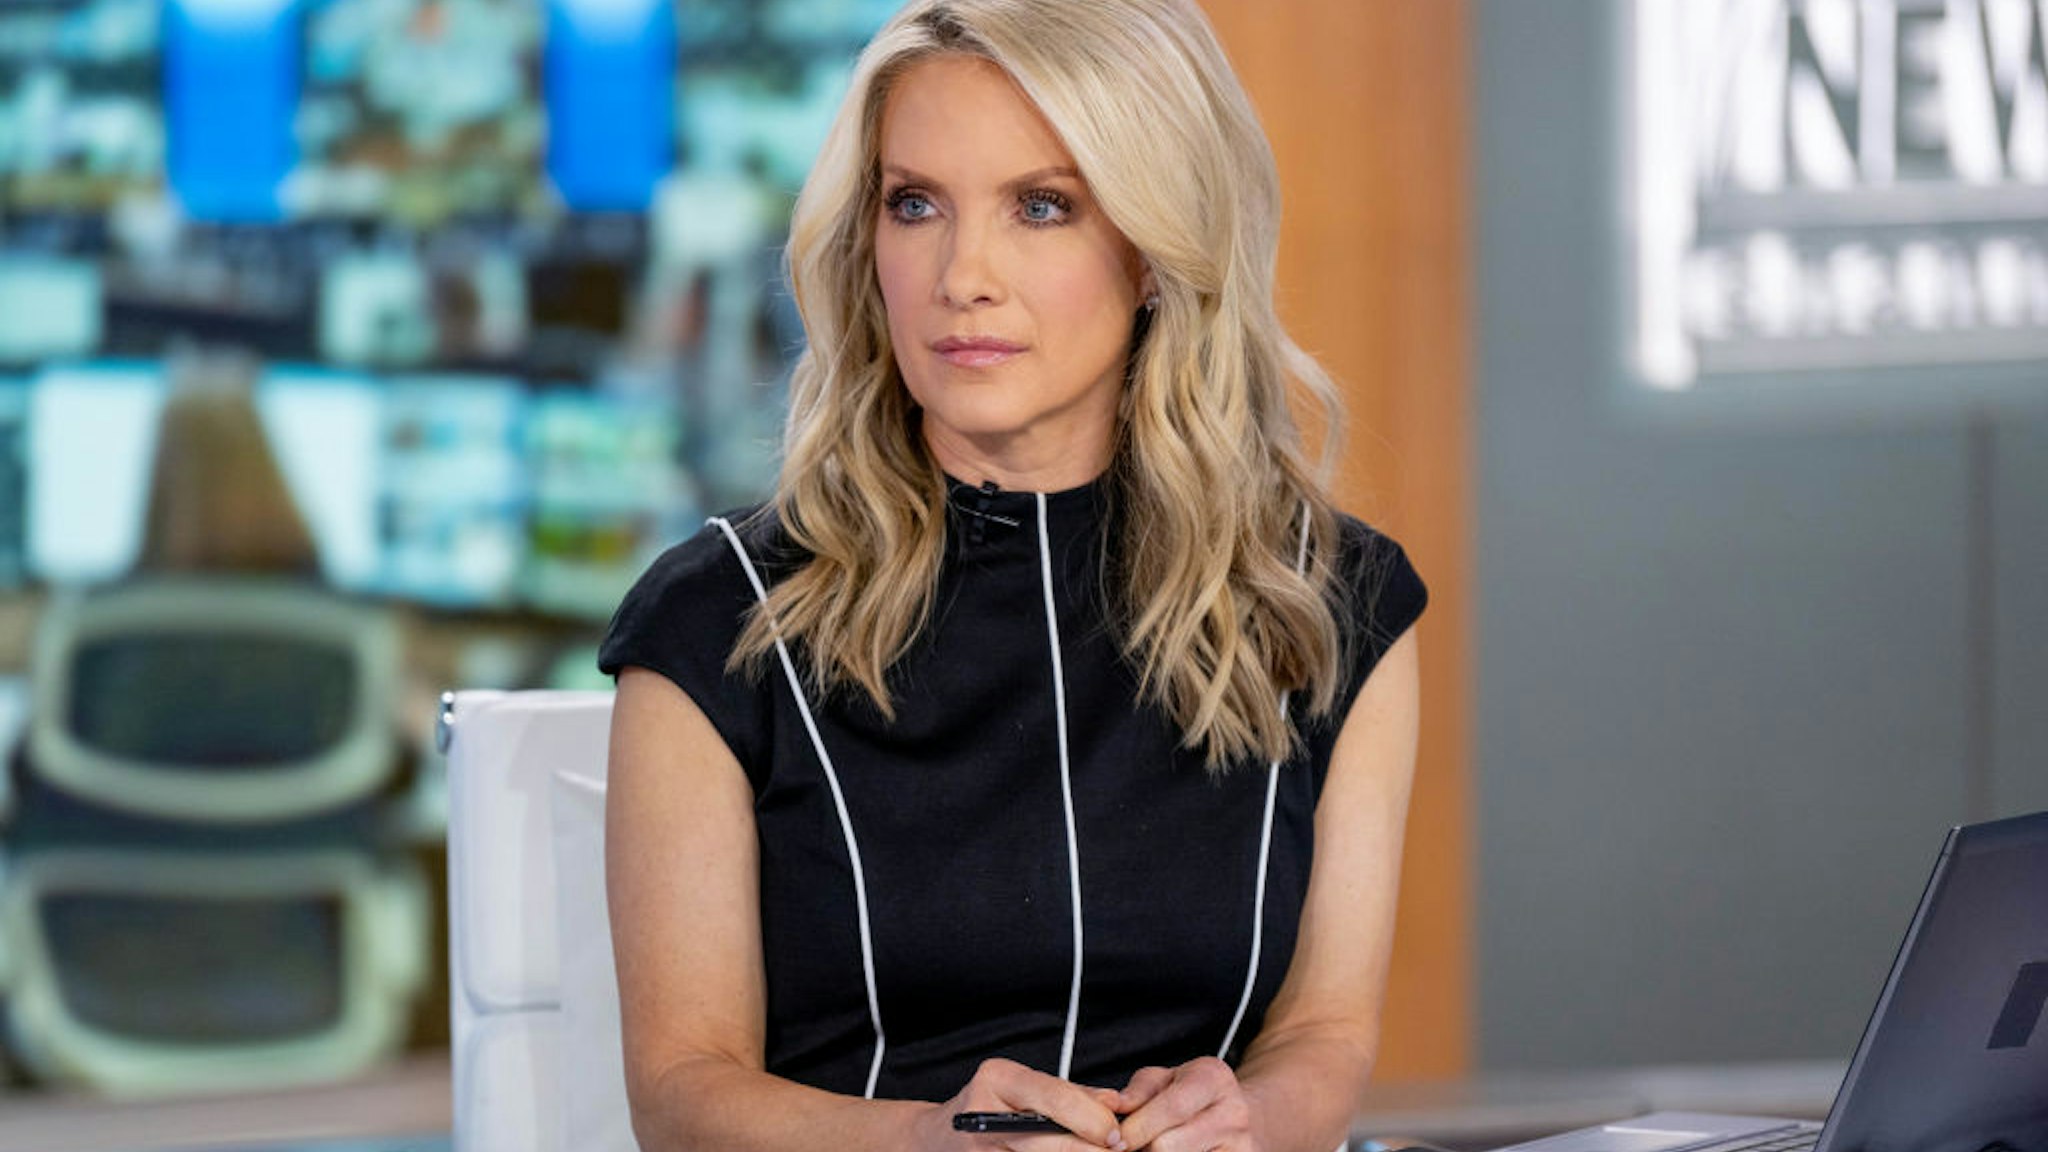 NEW YORK, NEW YORK - MAY 17: Host Dana Perino as former White House Press Secretary and Senior VP and Chief Communications Officer of United Airlines Josh Earnest visits "America's Newsroom" at Fox News Channel Studios on May 17, 2022 in New York City. (Photo by Roy Rochlin/Getty Images)